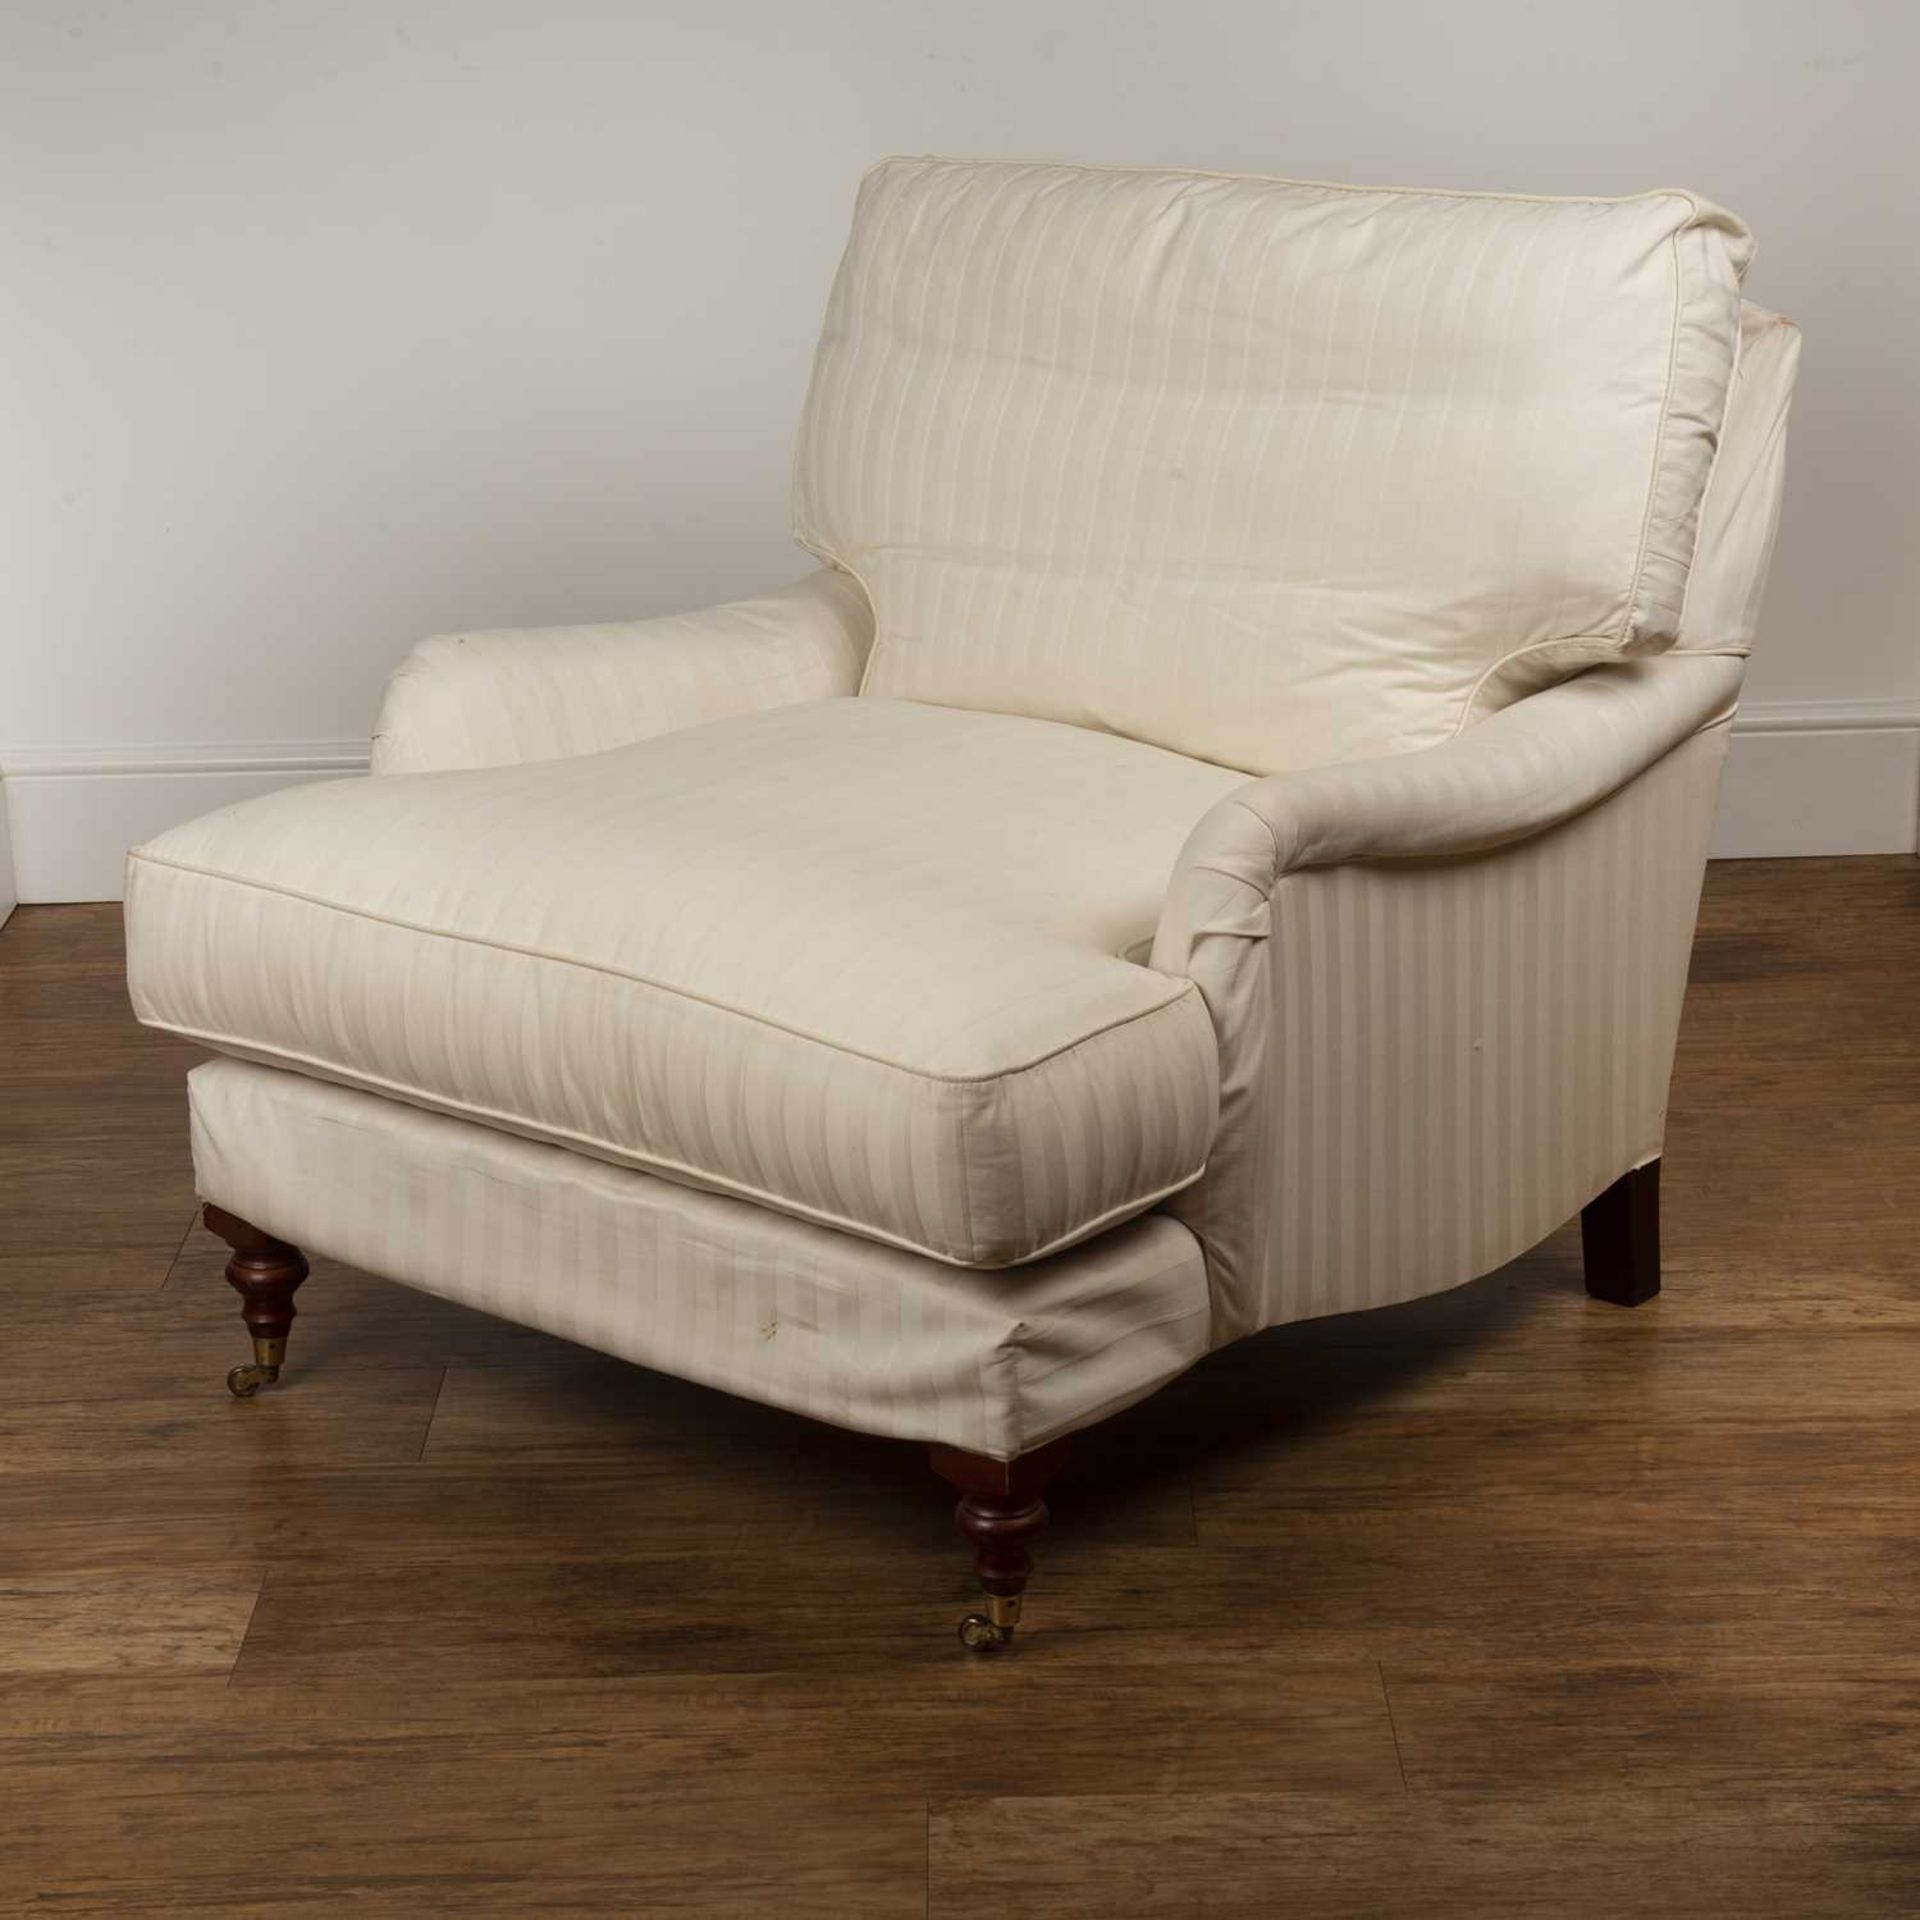 Howard style armchair Contemporary, with white striped upholstery, on brass castors, 86cm wide - Image 3 of 5